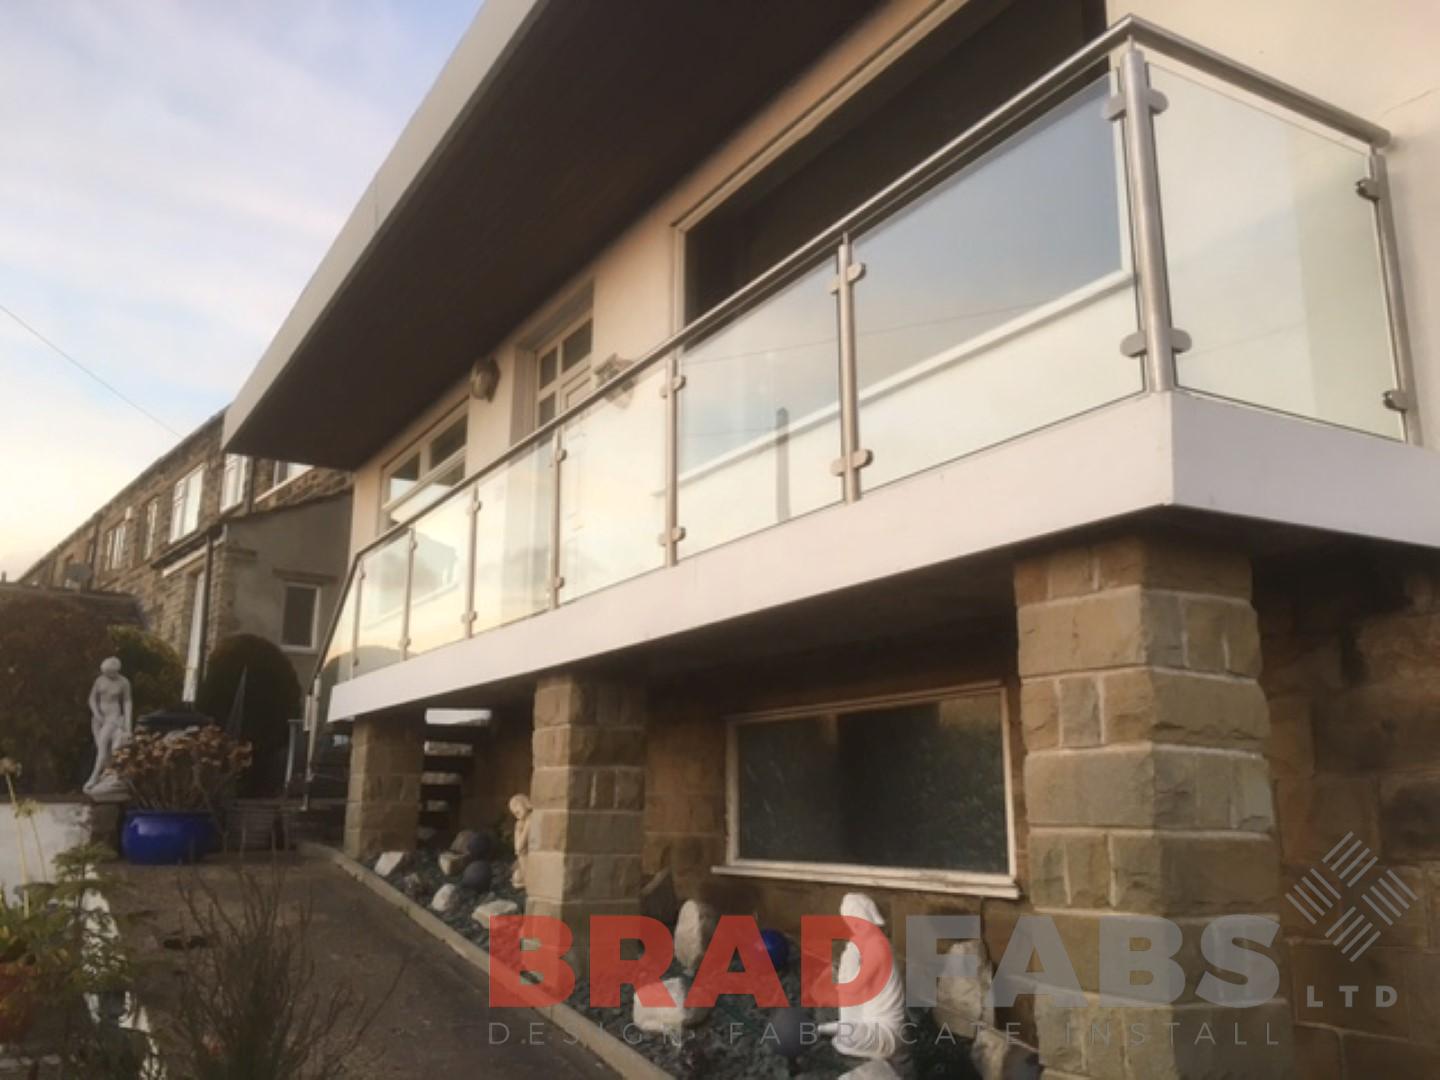 Stainless Steel and Glass Balustrade